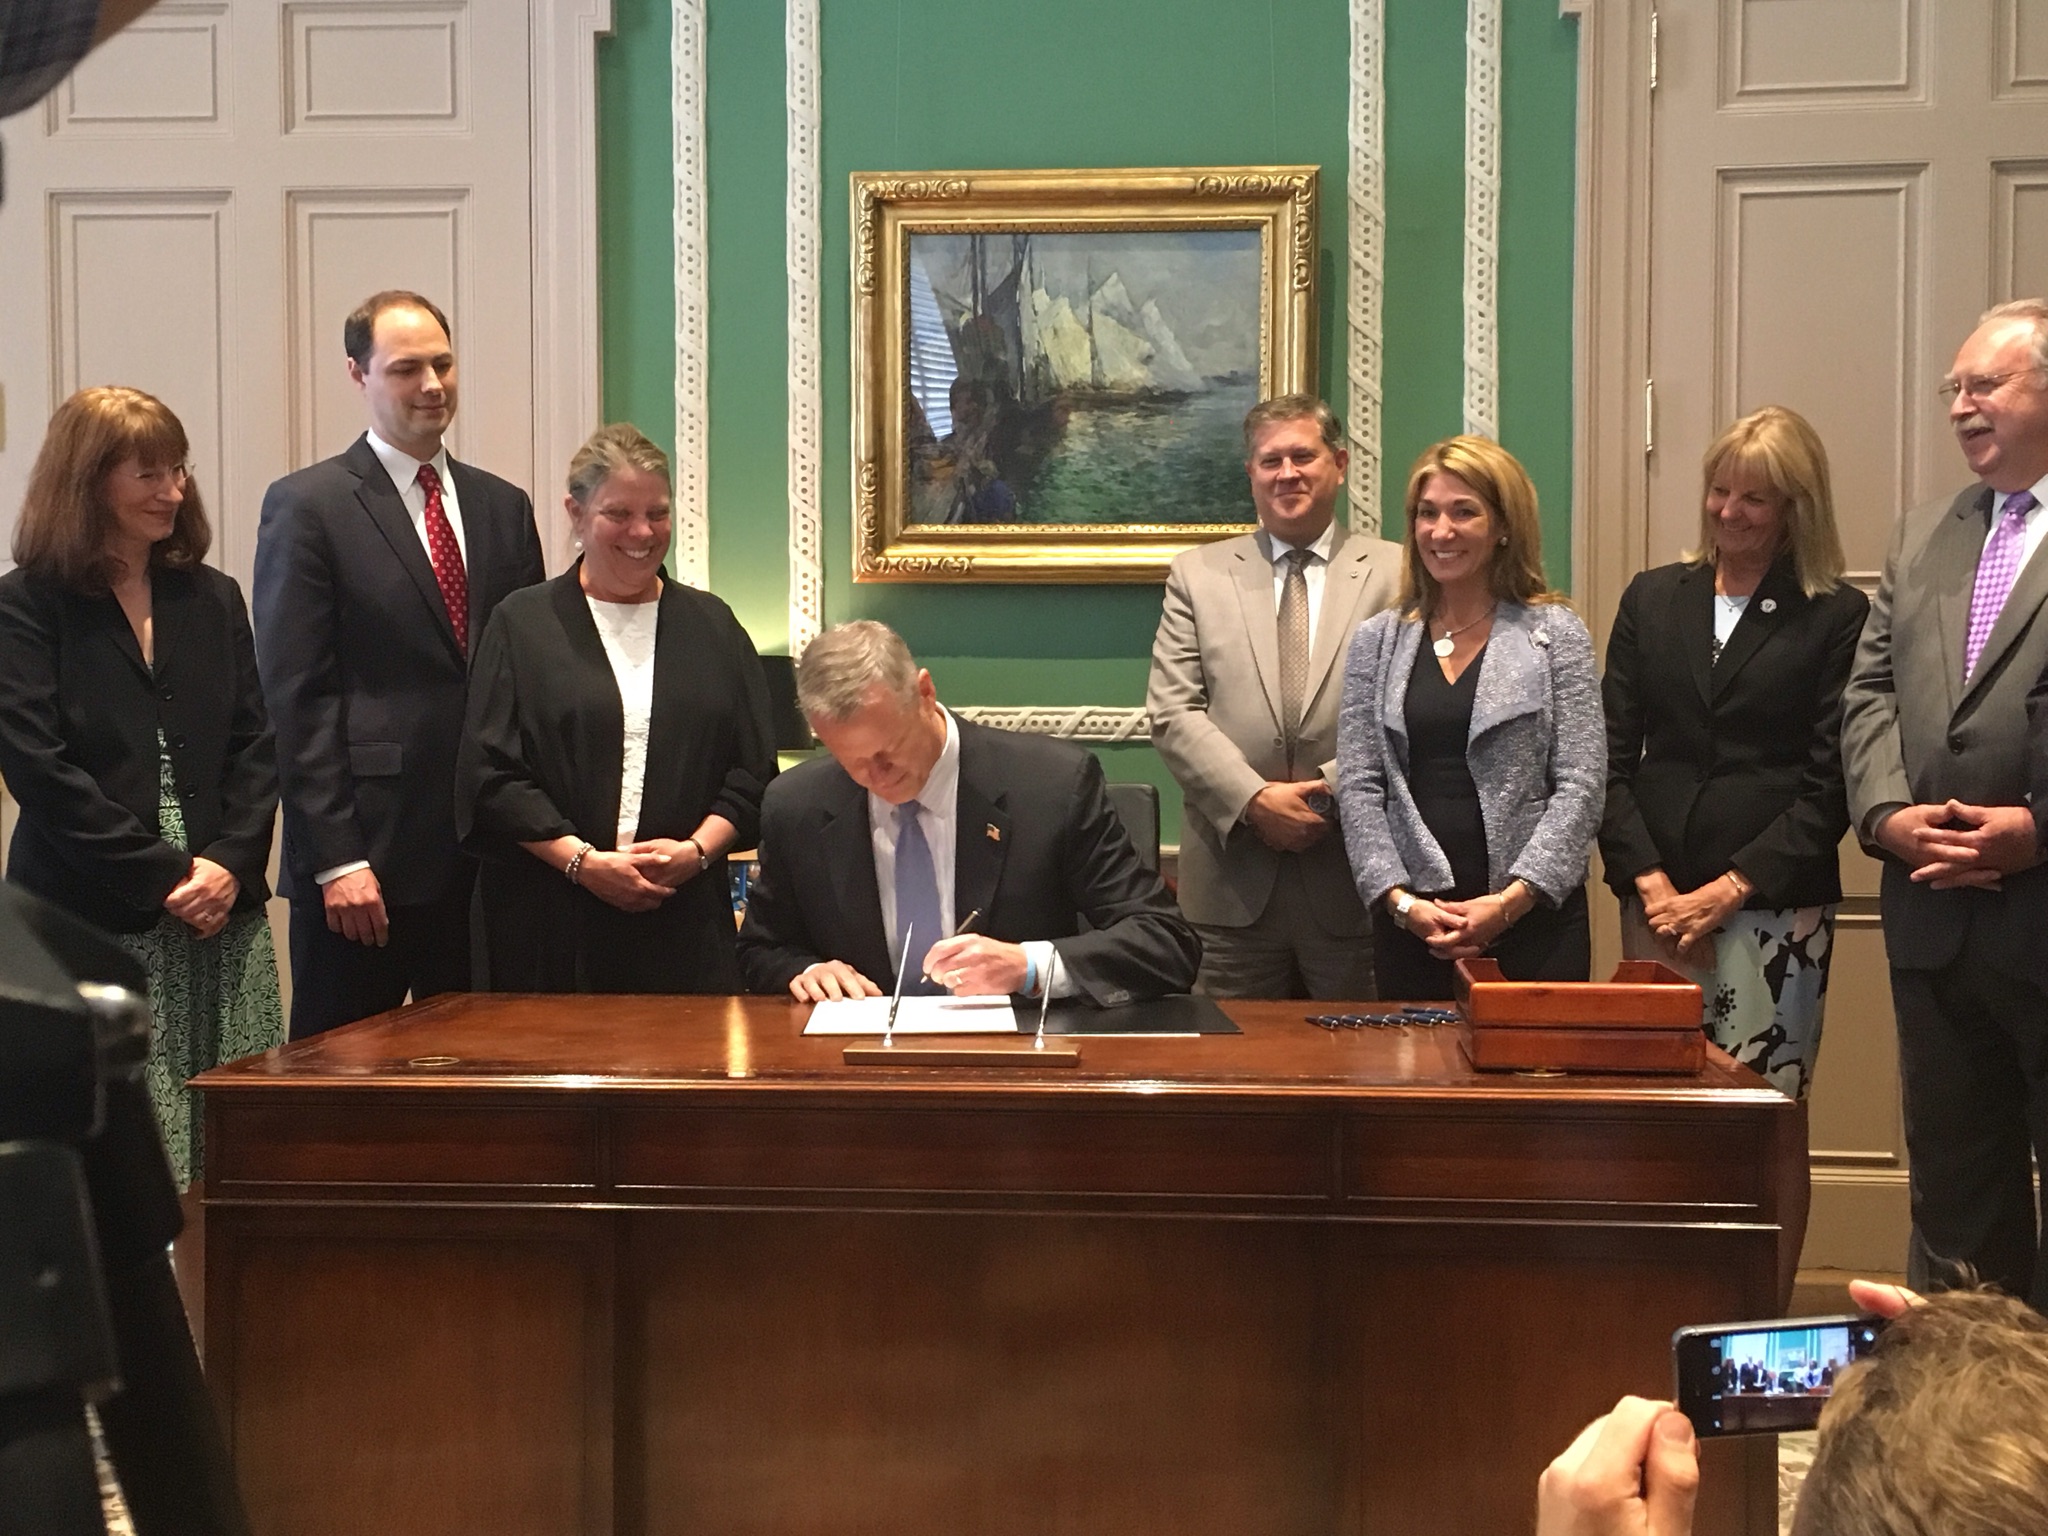 GOVERNOR BAKER SIGNS PUBLIC RECORDS REFORM BILL INTO LAW